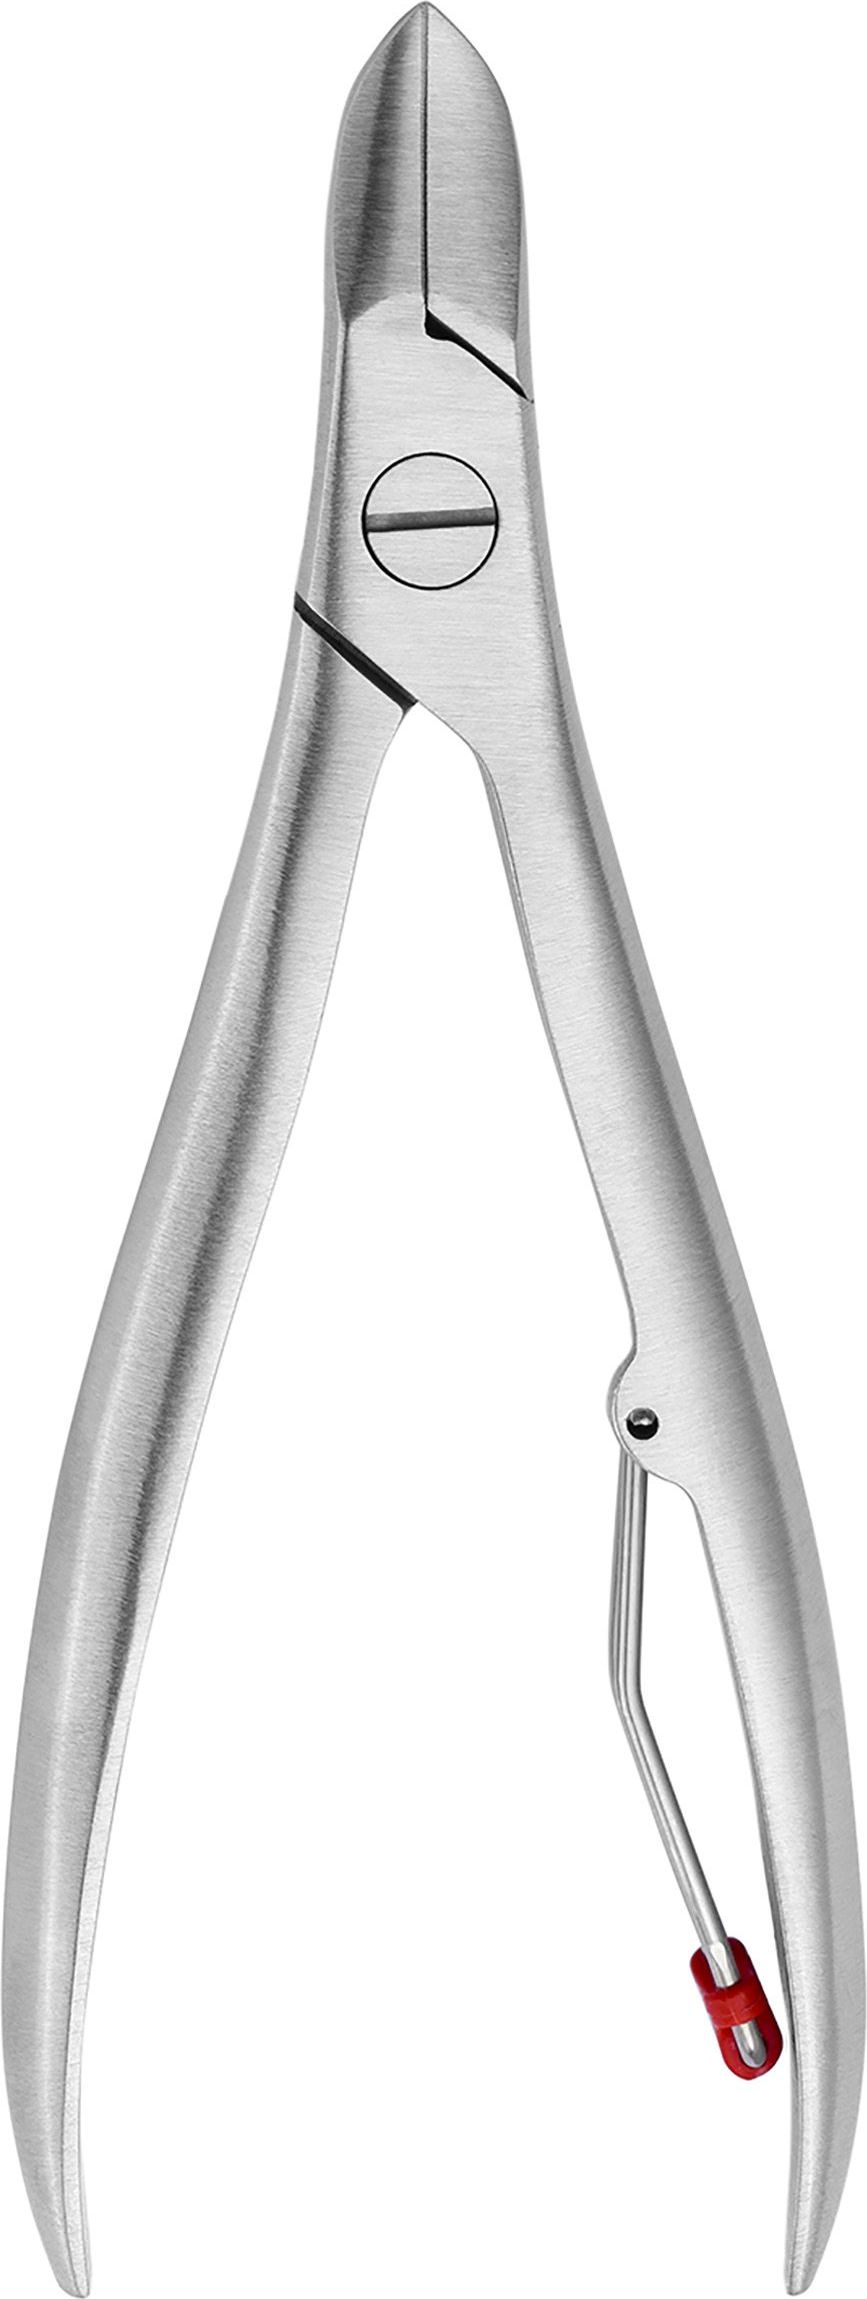 Twinox Nail clipper with keyring - Zwilling 42445-000-0